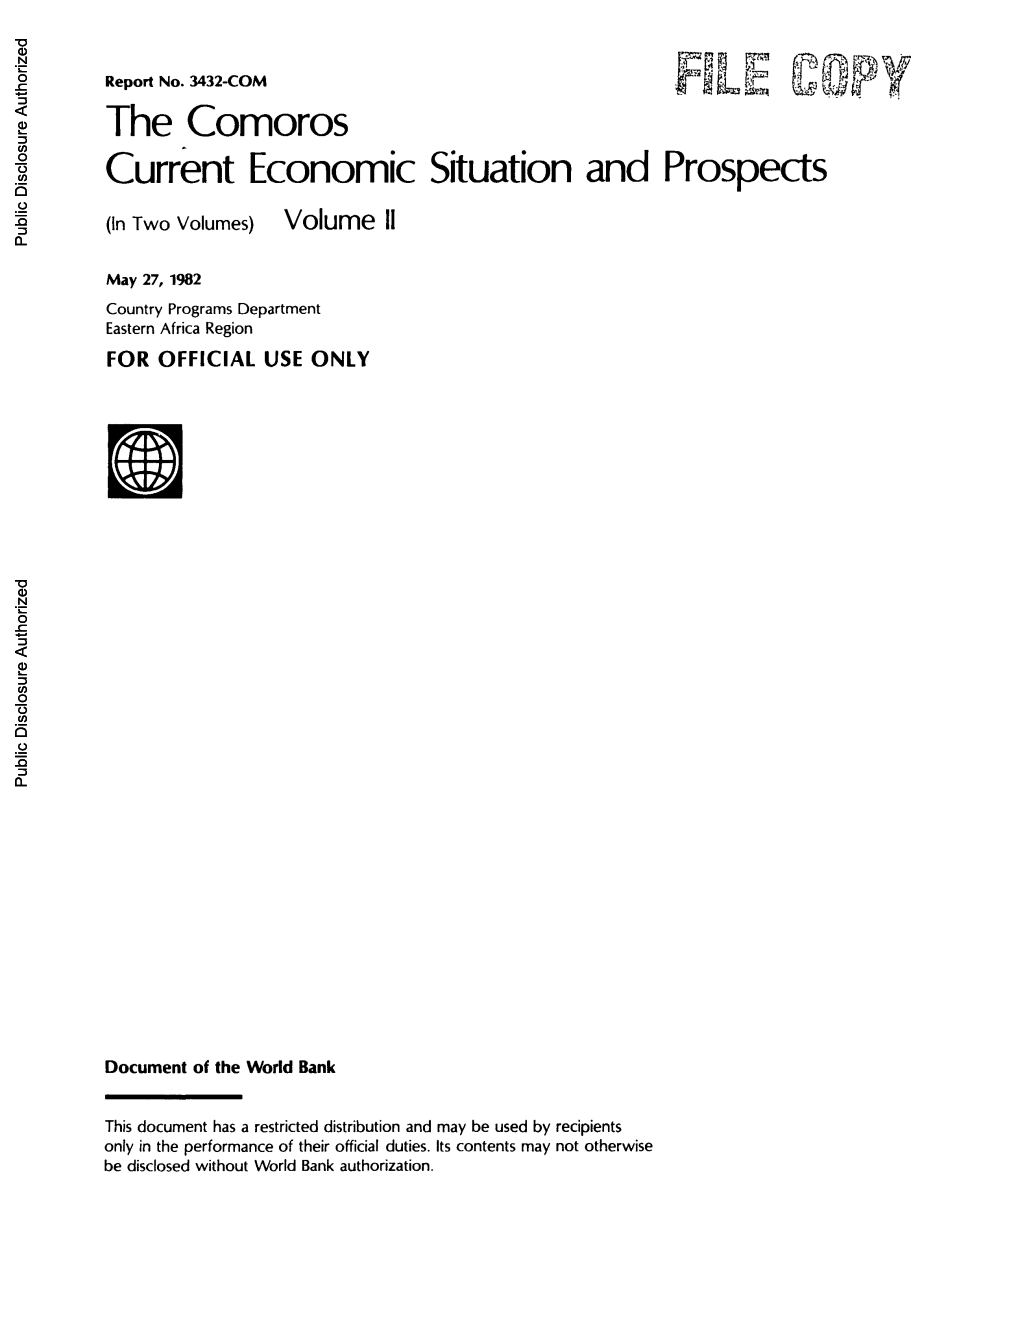 The Comoros Current Economic Situation and Prospects (In Two Volumes) Volume 11 Public Disclosure Authorized